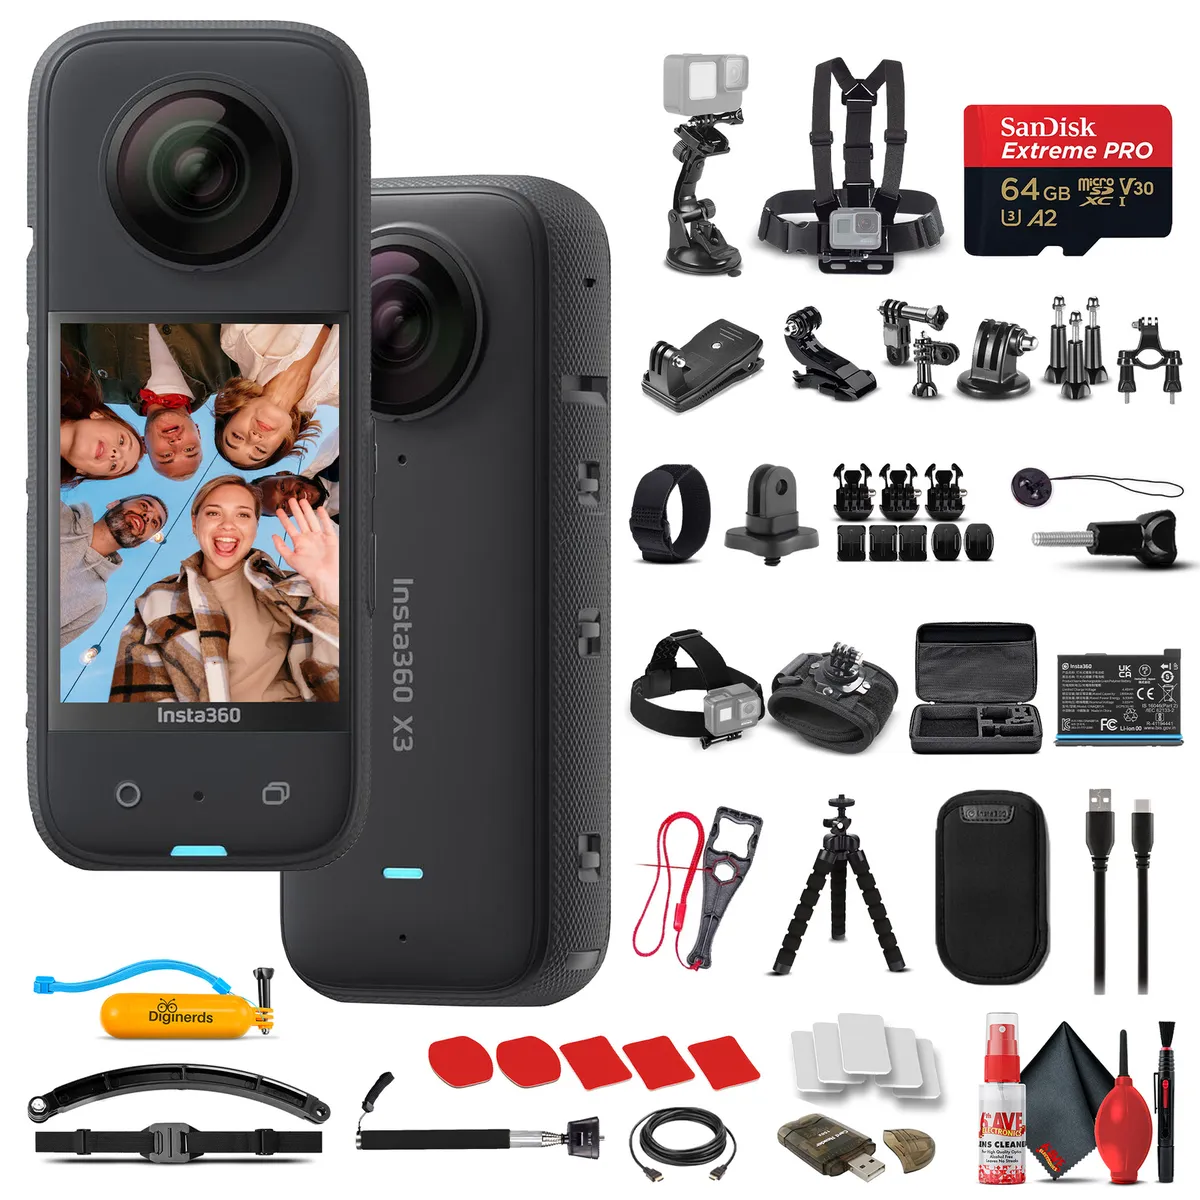 insta360 X3- Waterproof 360 Action Camera with 1/2'' 48MP Sensors, 5.7K HDR  Video, 72MP Photo, 4K Single-Lens, 60fps Me Mode, 2.29'' Touchscreen, AI